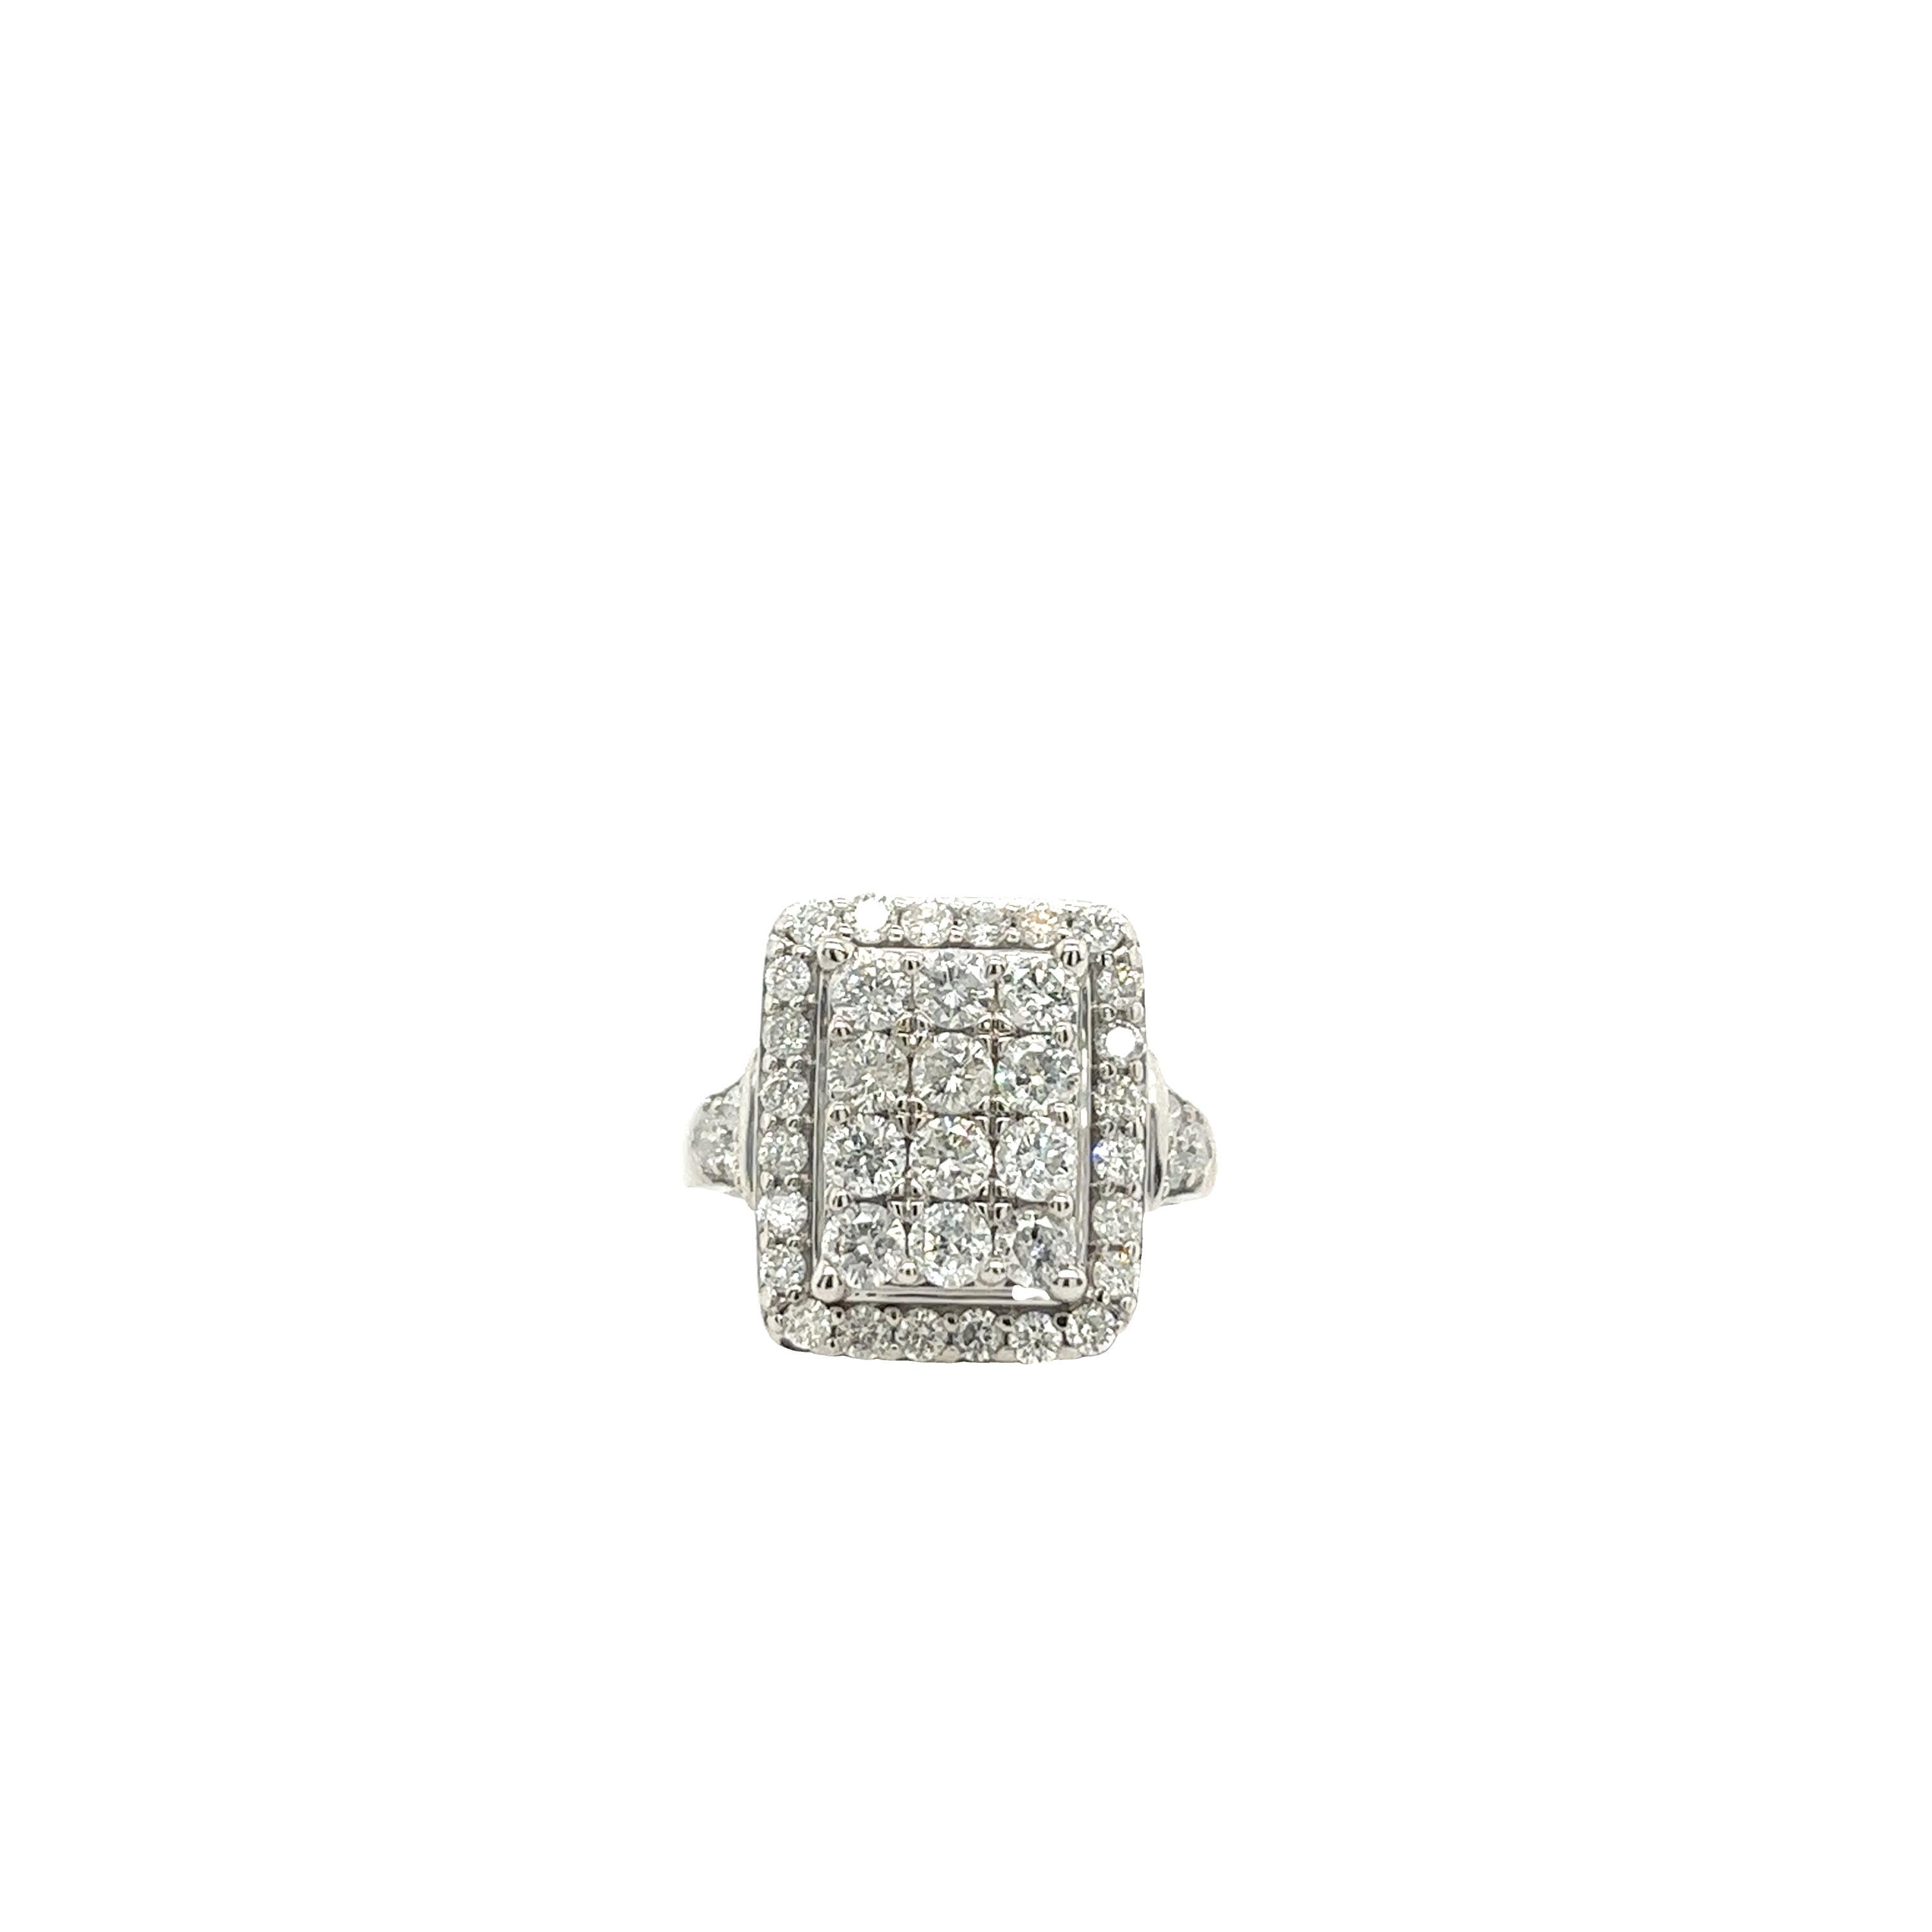 Round Cut 9ct White Gold 1.20ct Rectangle Shaped Diamond Ring With Diamond Set Shoulder